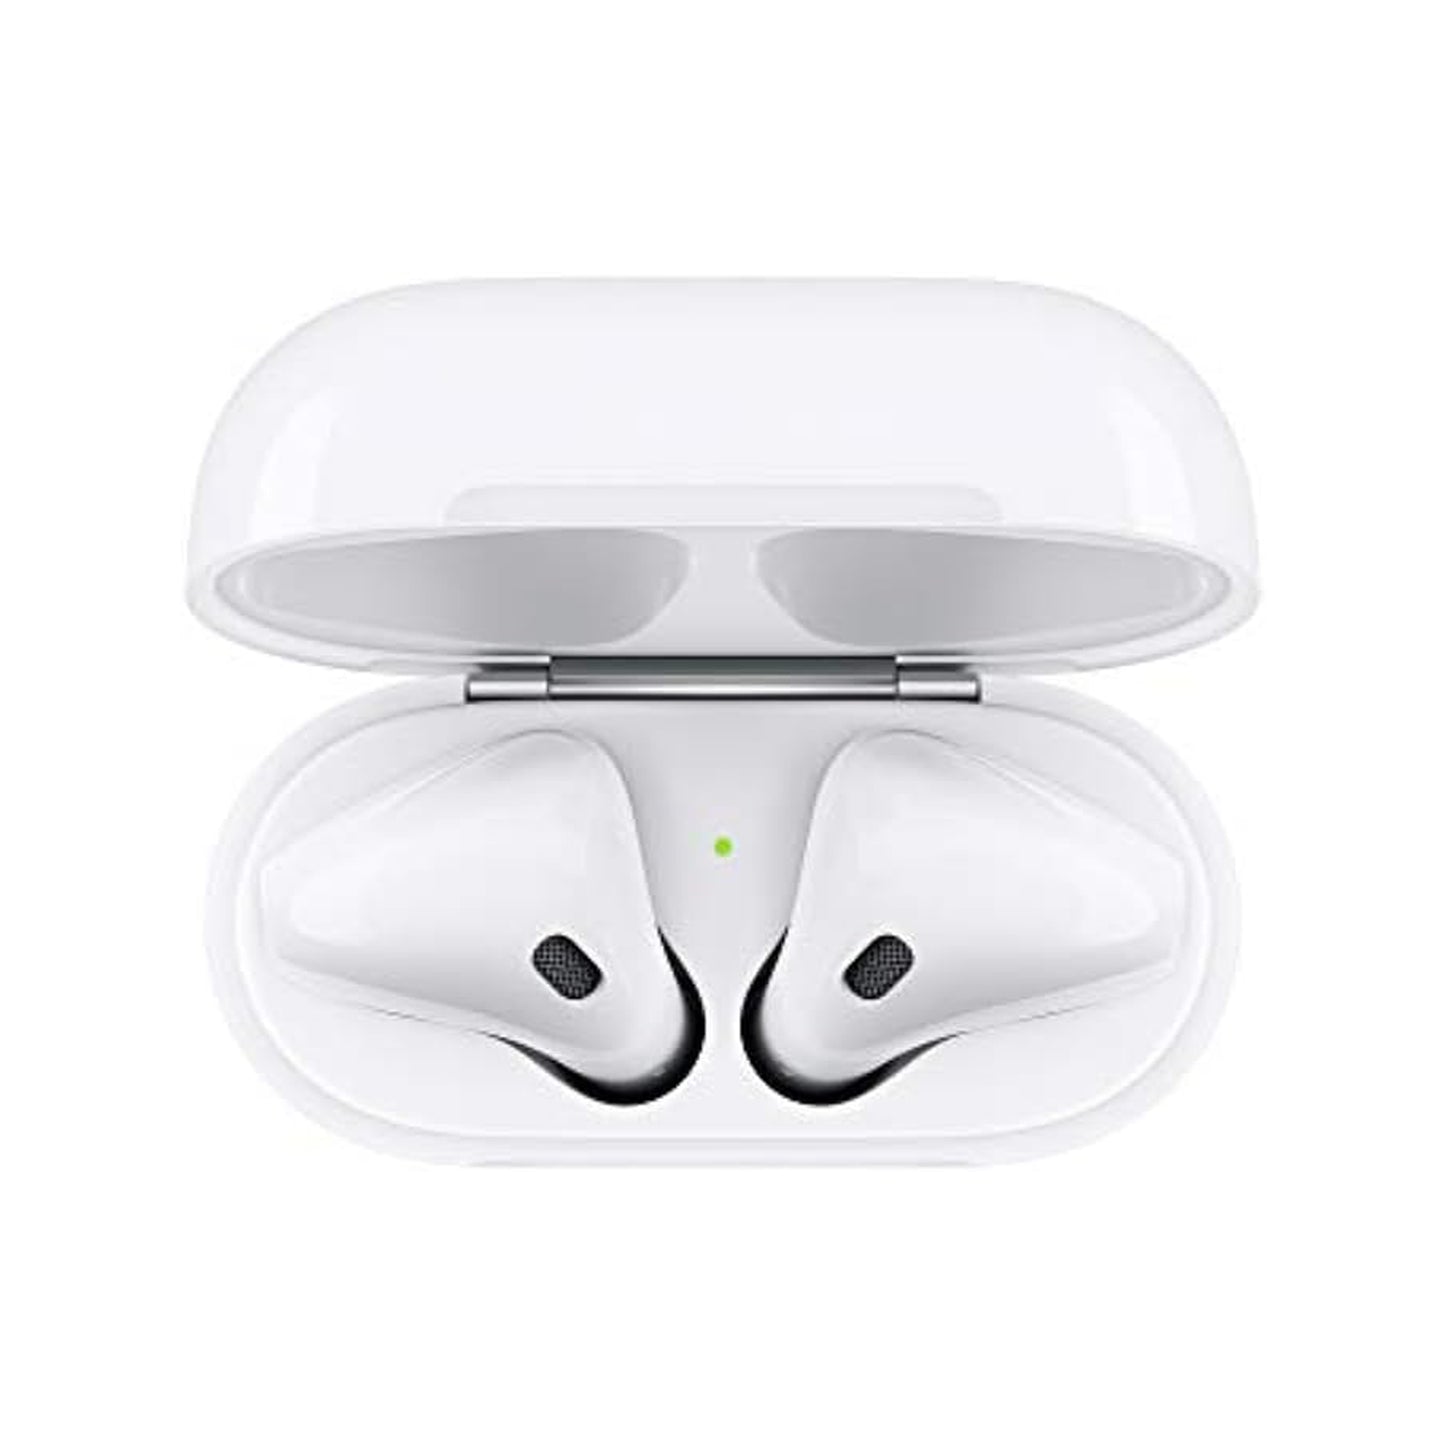 AirPods (2nd Generation) Wireless Ear Buds